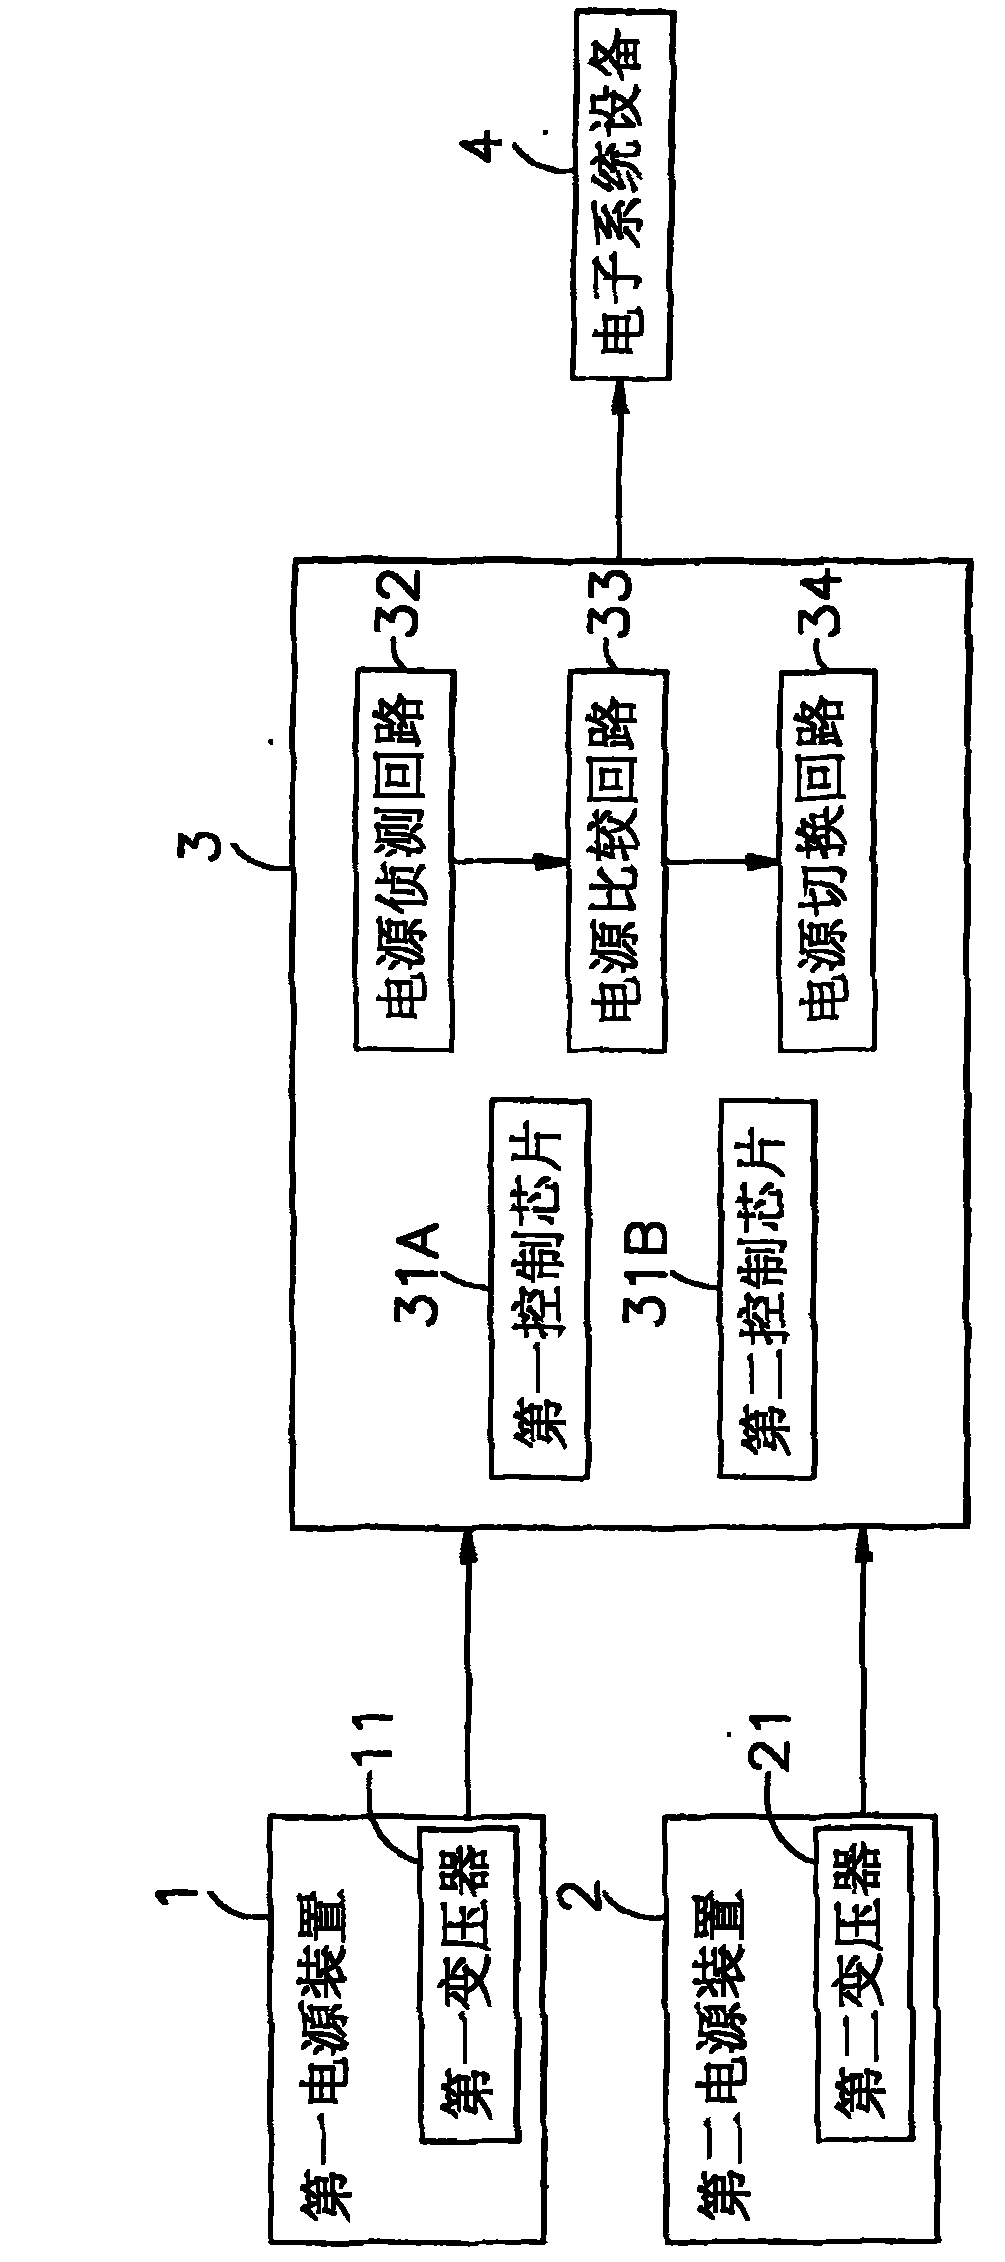 Low-voltage double-power supply loop device and control method thereof